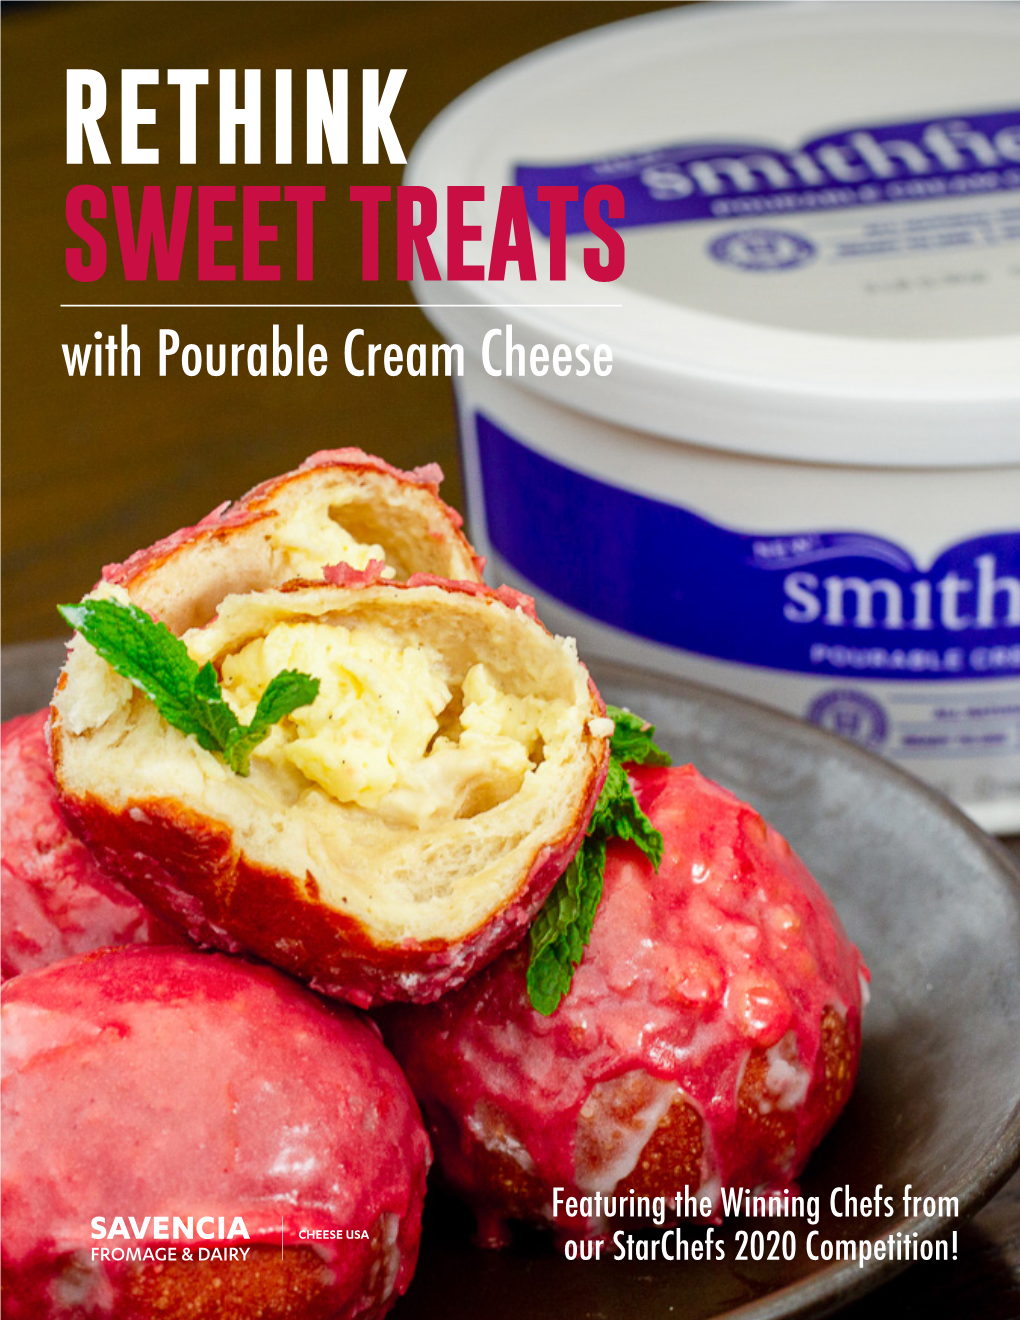 RETHINK SWEET TREATS with Pourable Cream Cheese